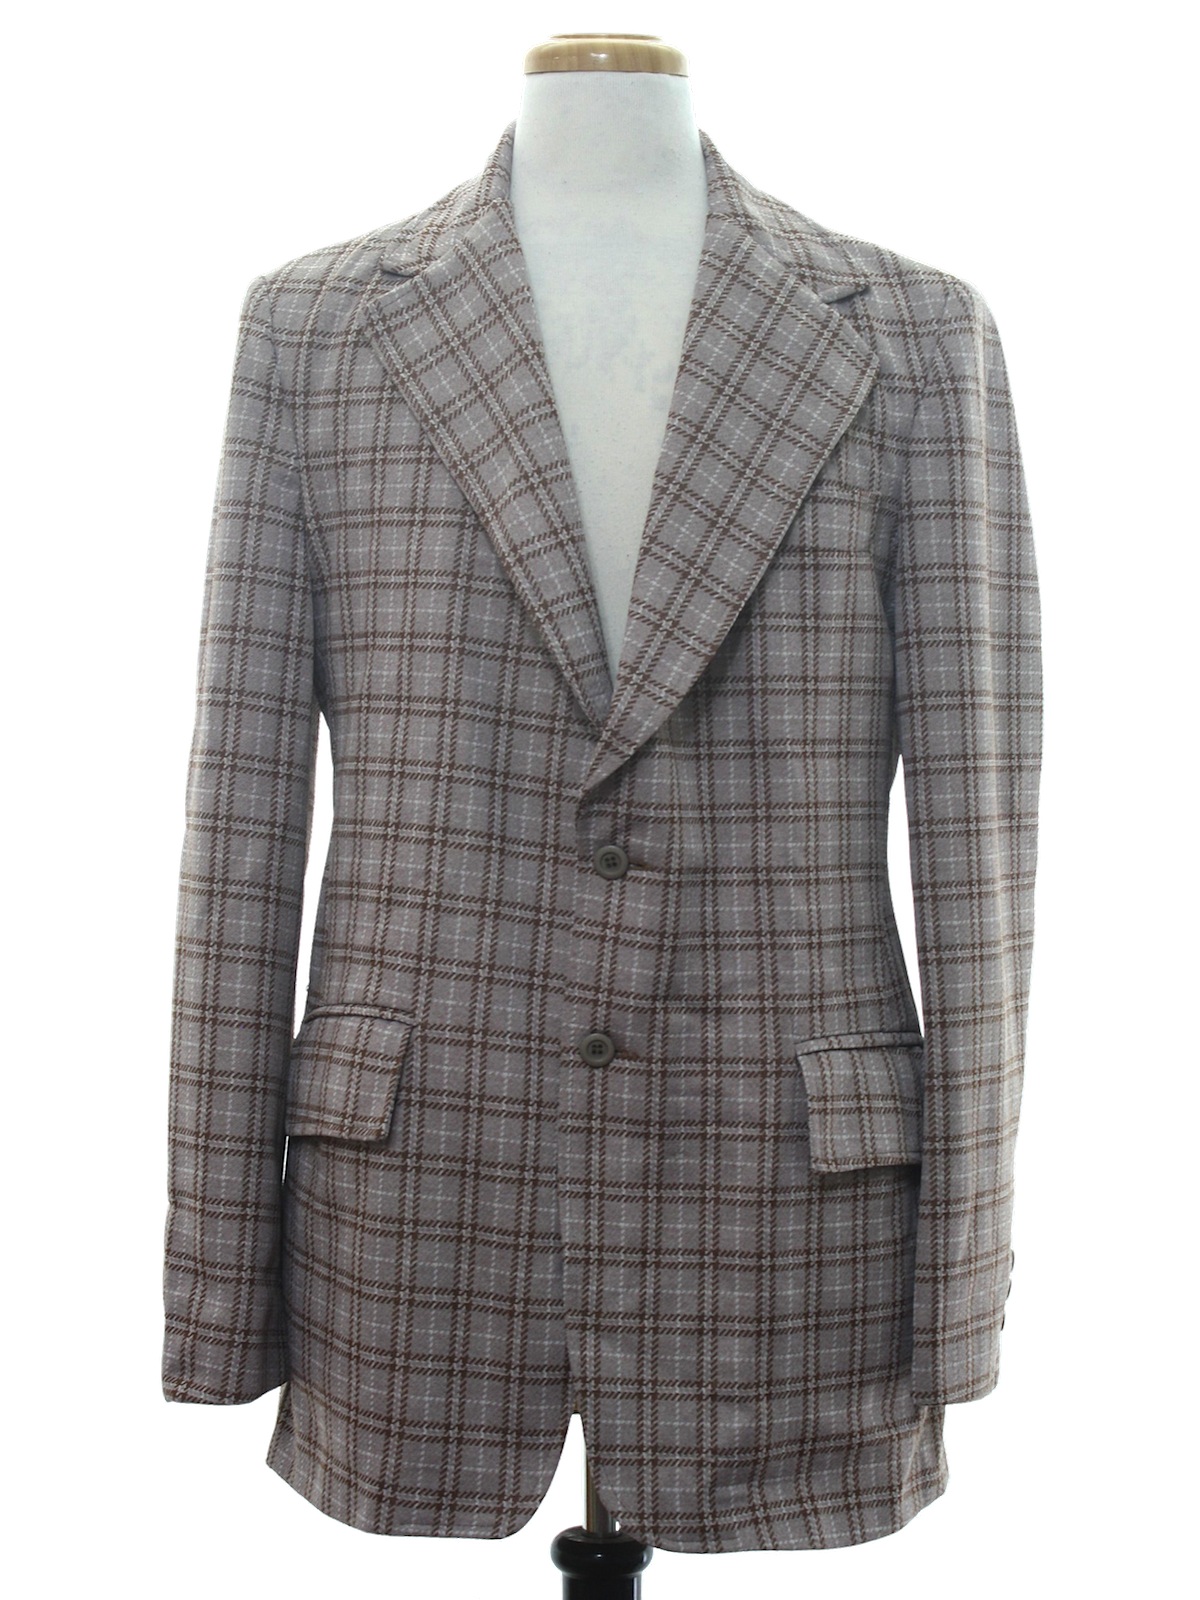 Retro 70's Jacket: 70s -Lenox Royal- Mens taupe background, brown and ...